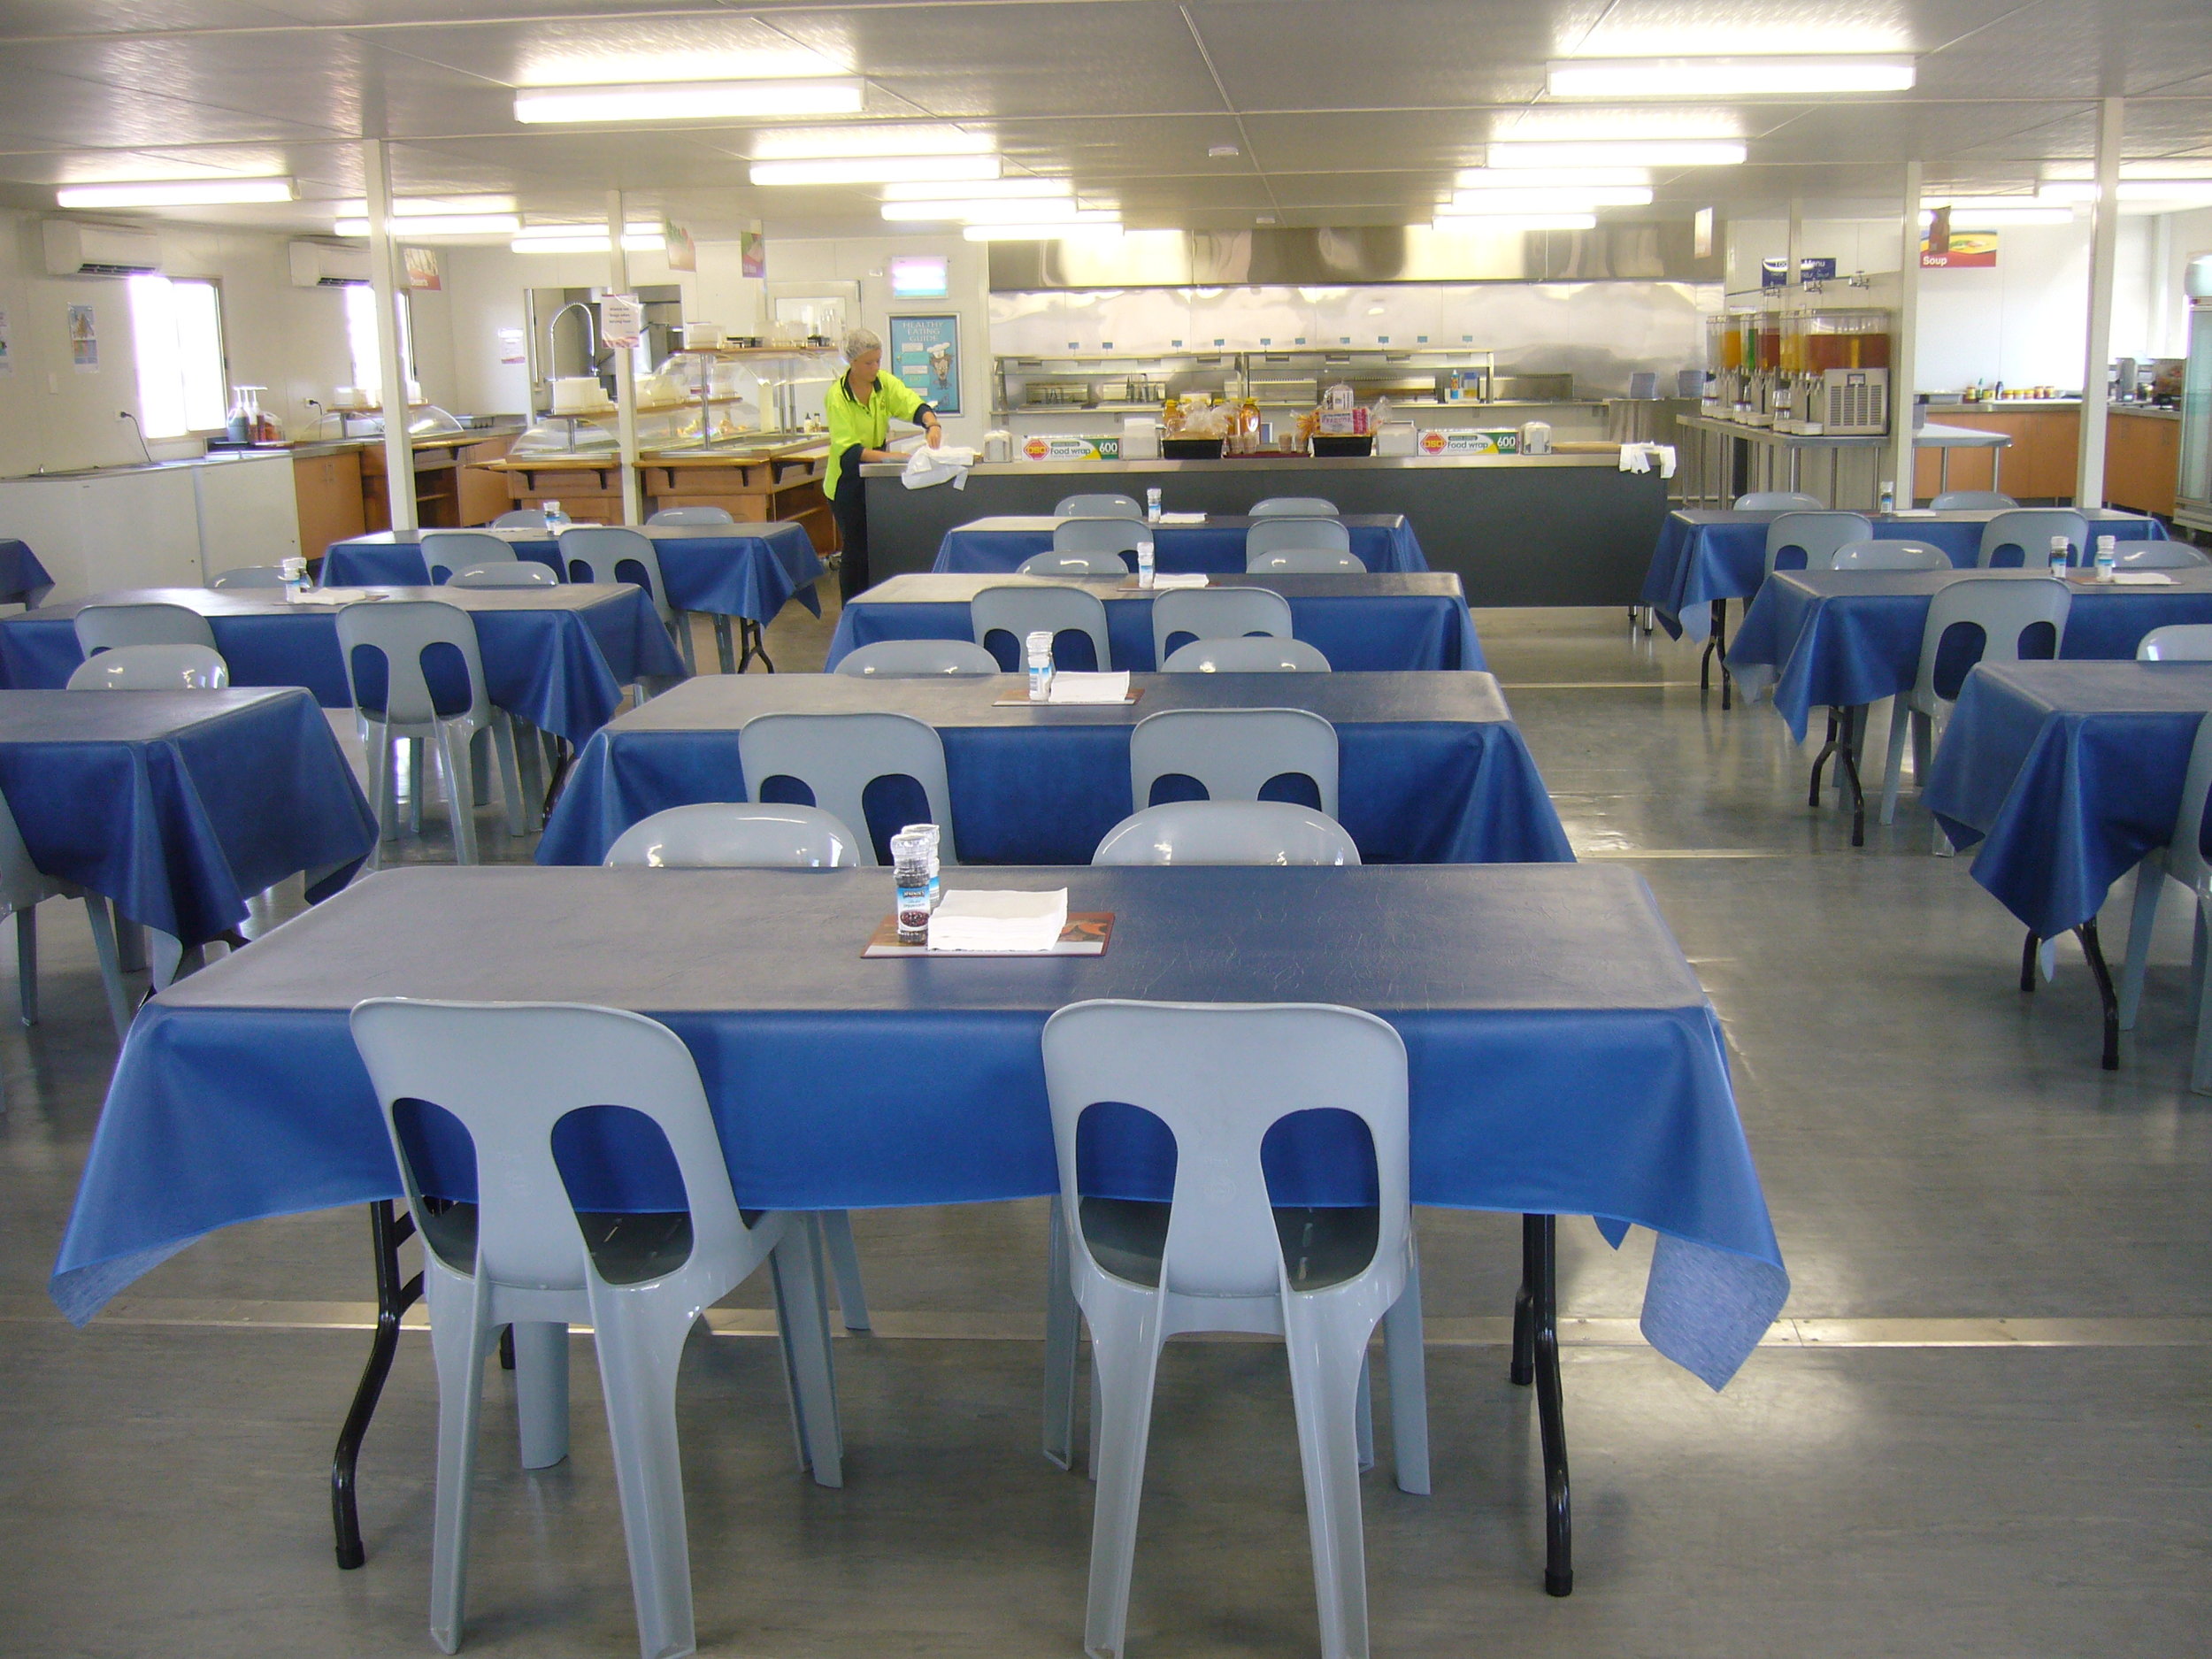 Typical Construction Camp and Mining Camp Dining Room